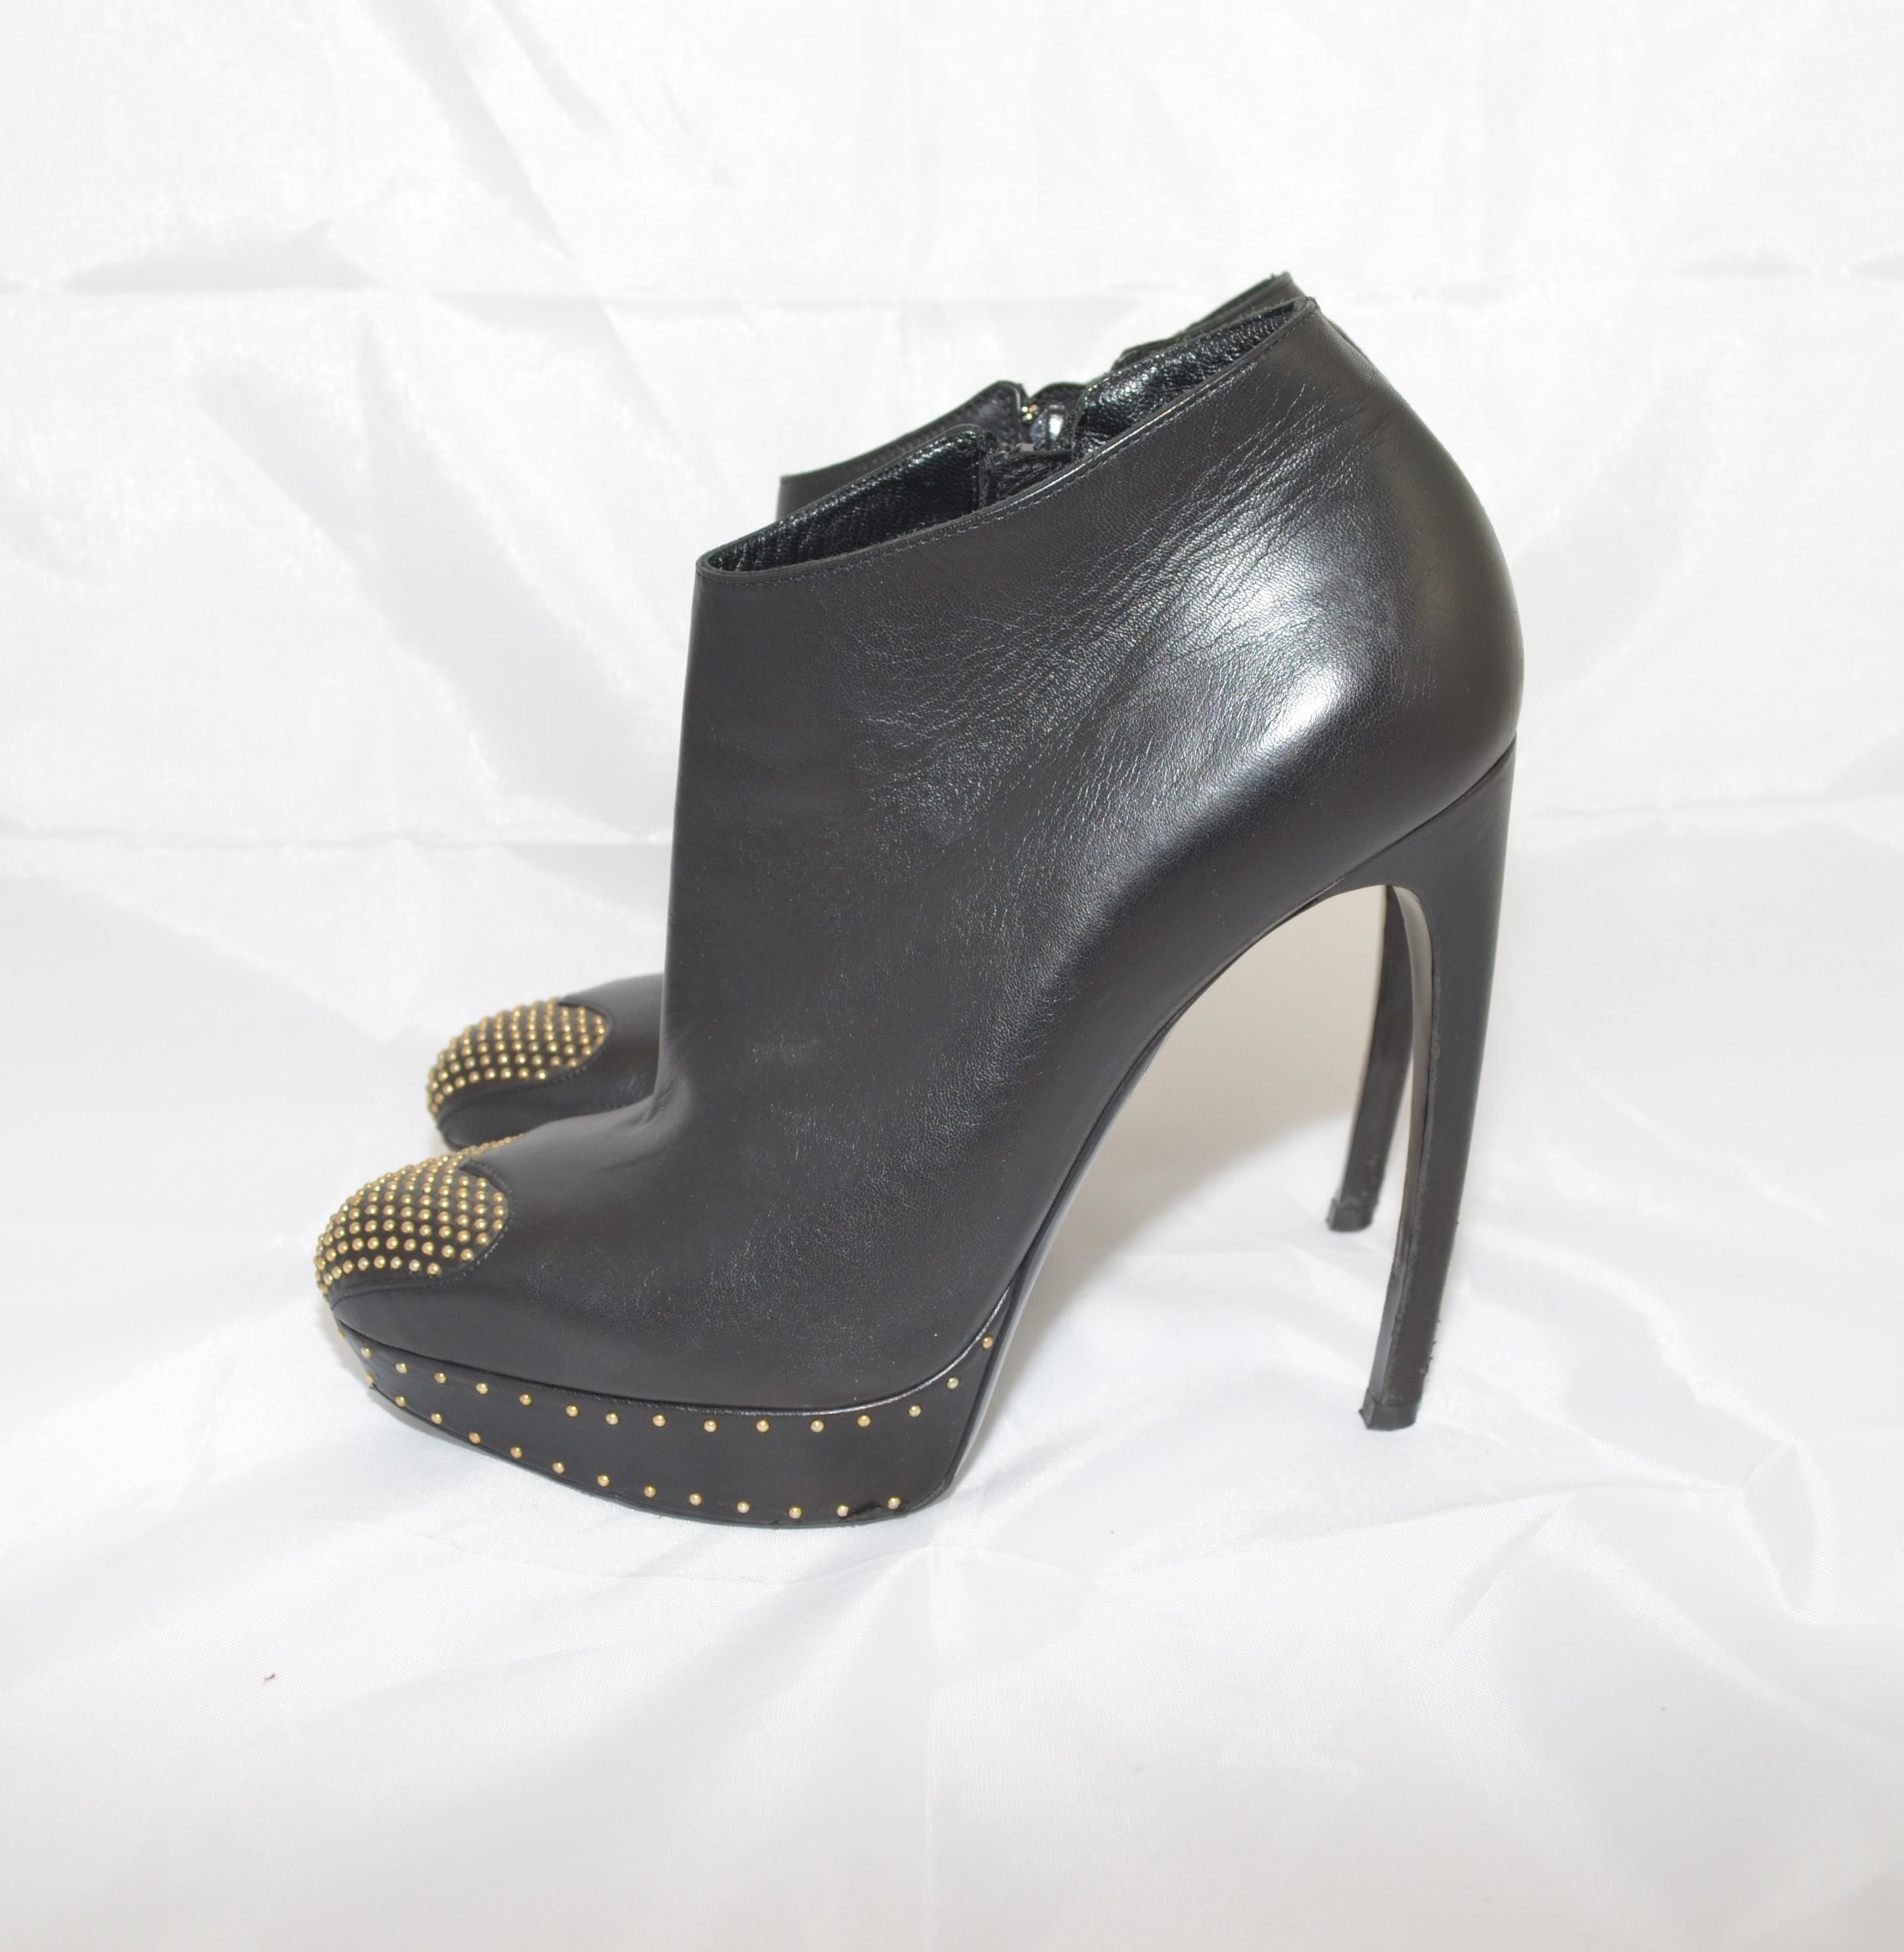 Black Alexander McQueen Leather Platform Boots with Studded Heart Motif For Sale